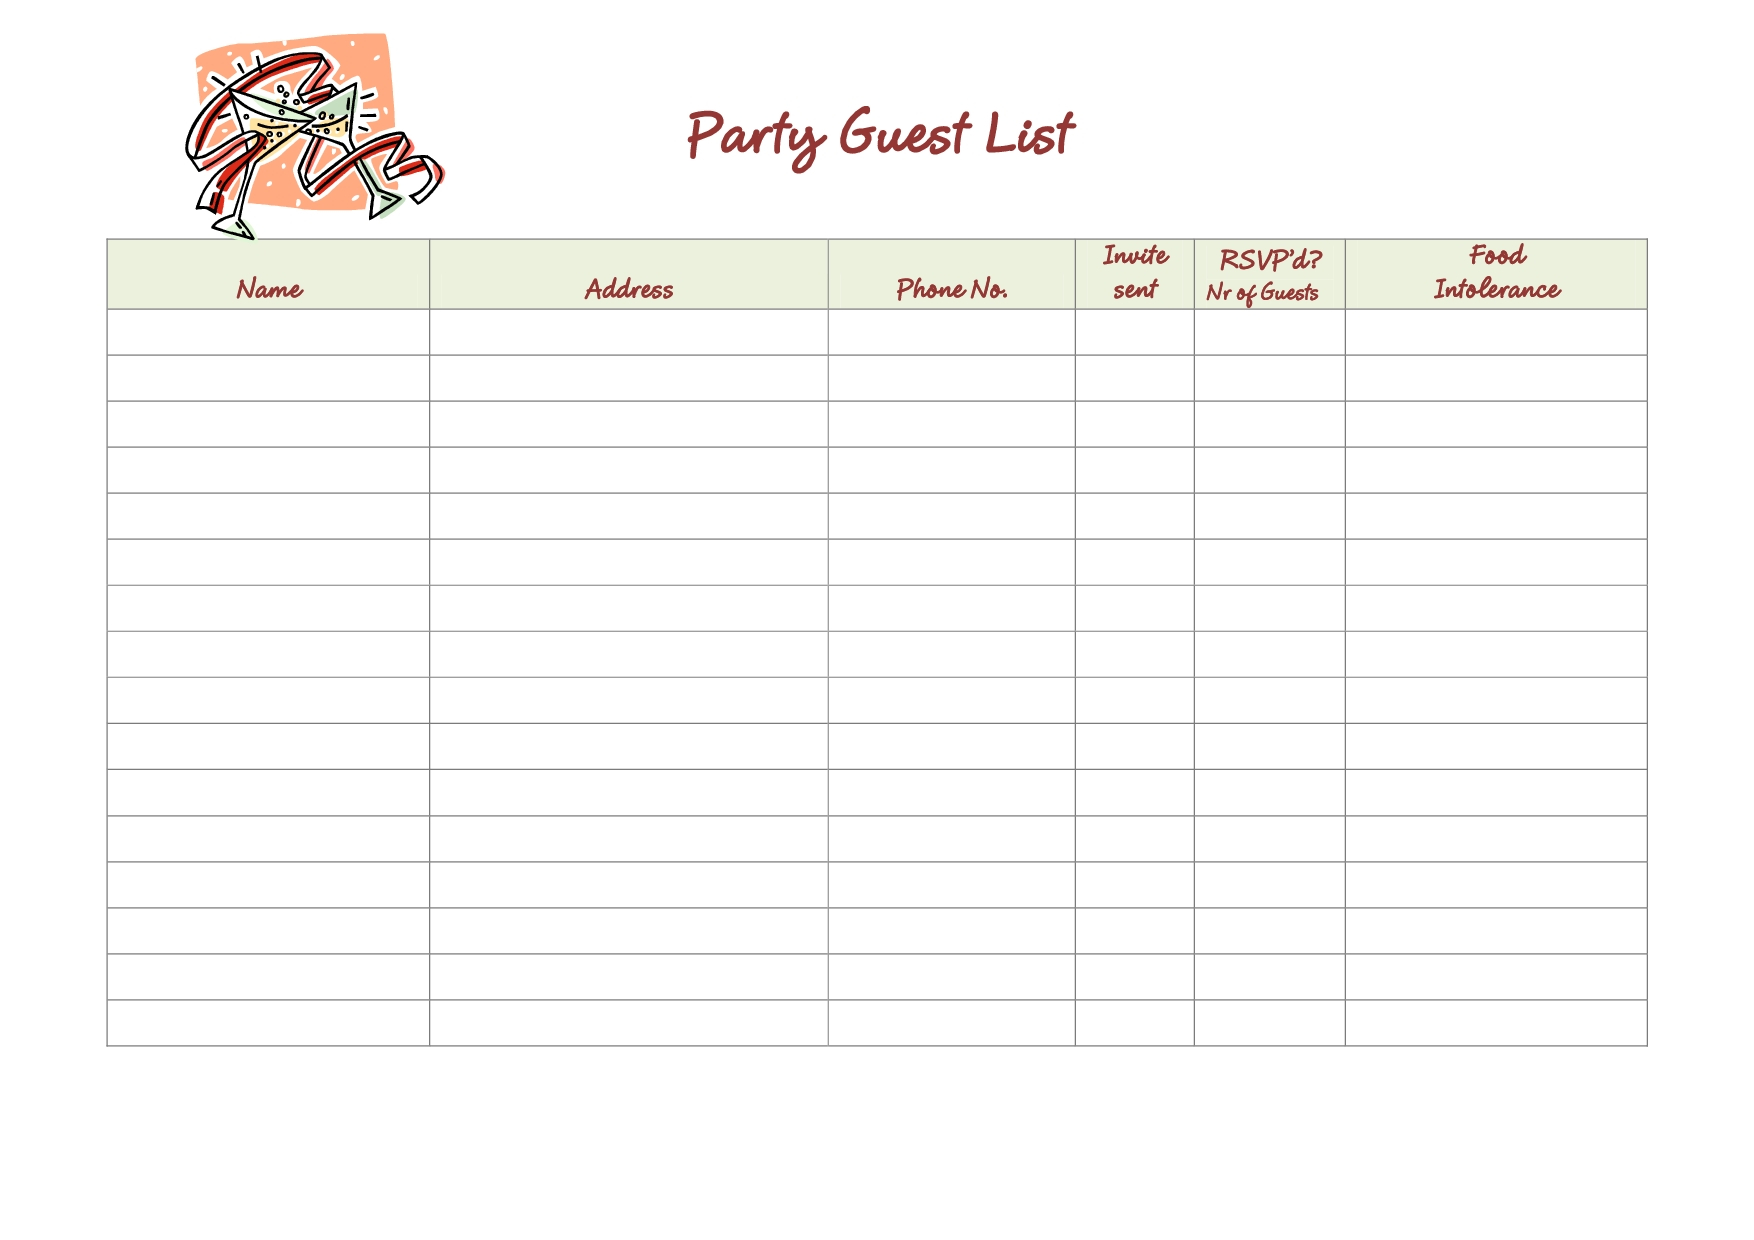 41-free-guest-list-templates-word-excel-pdf-formats-free-printable